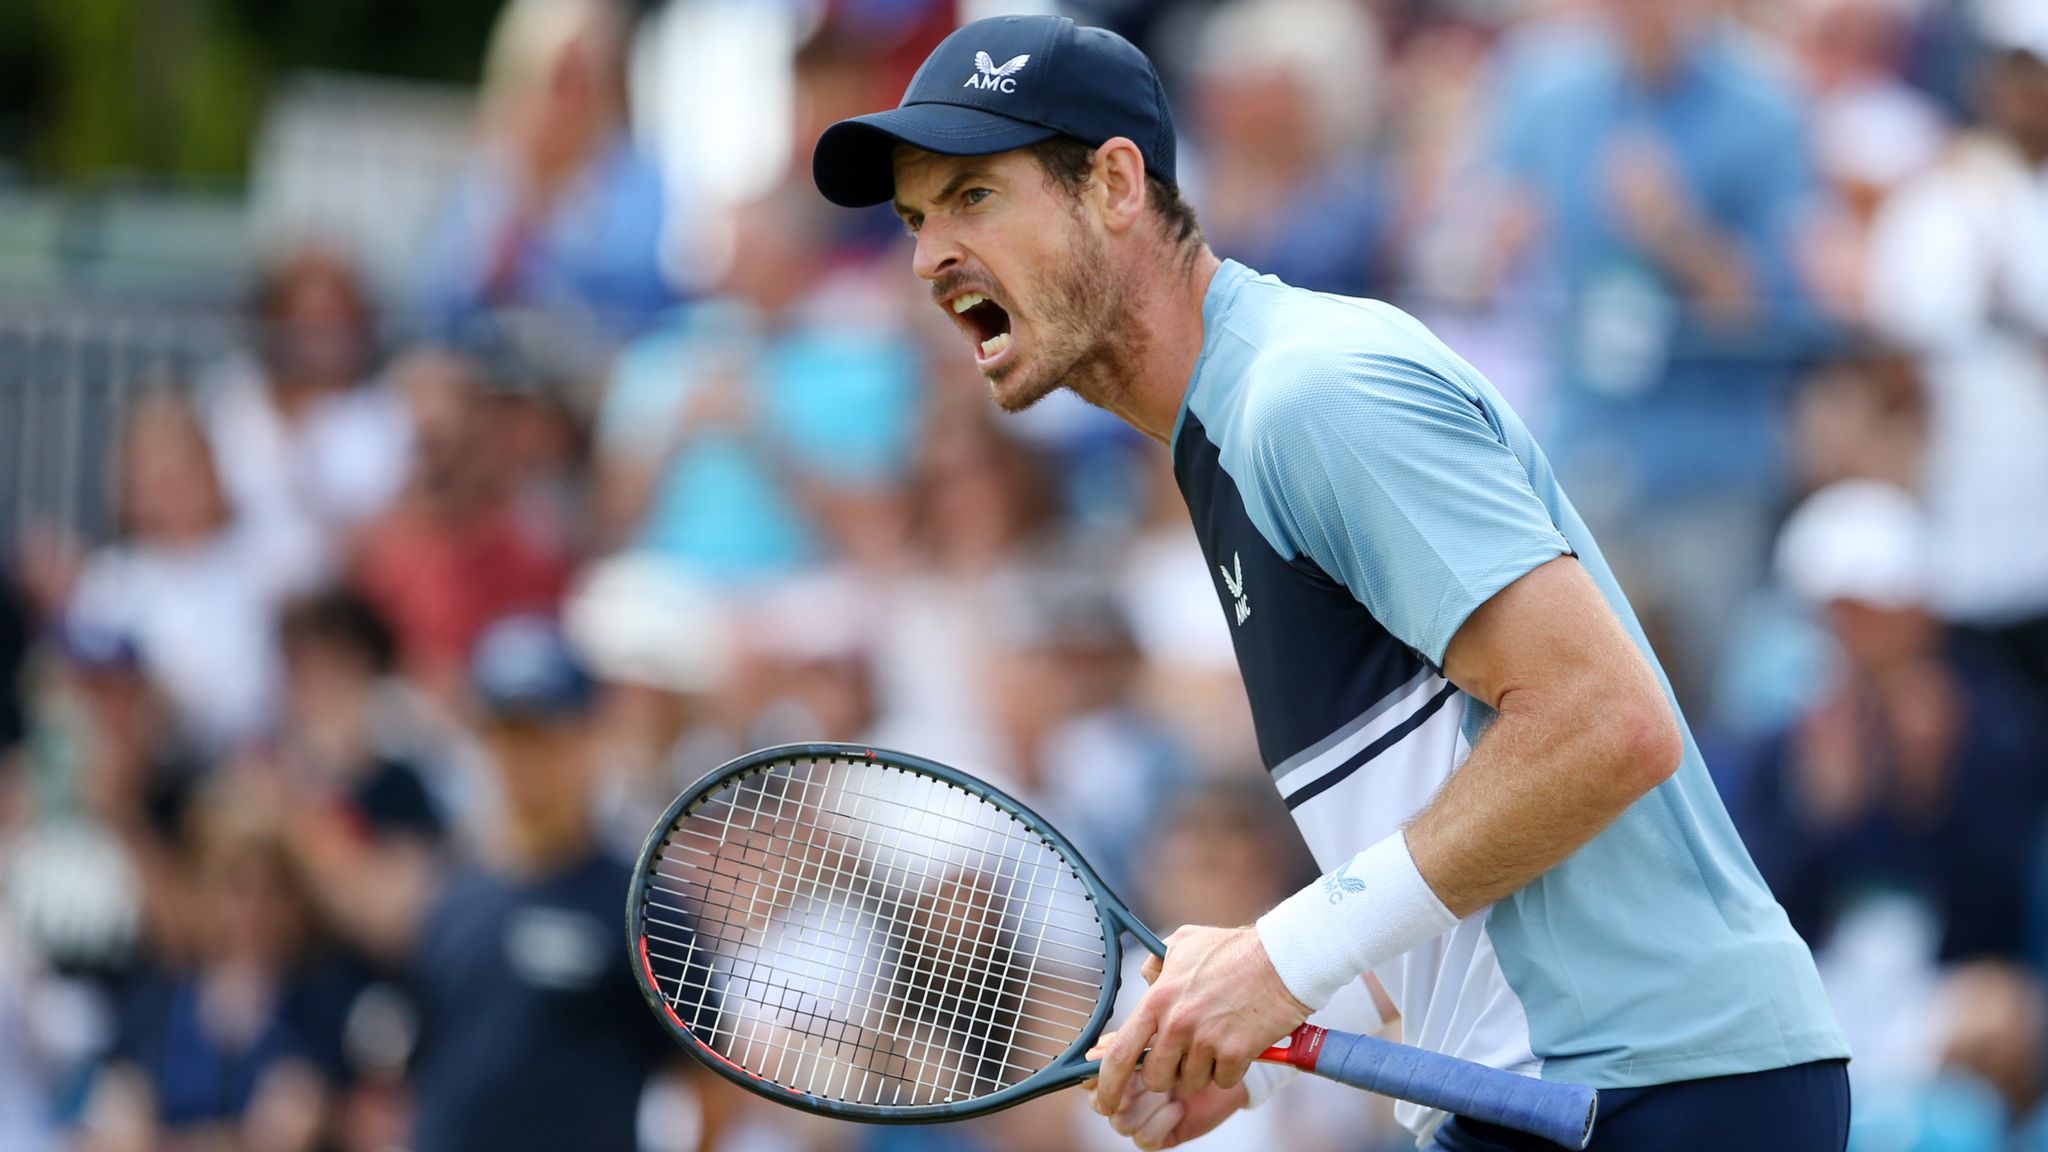 Andy Murray beats Gijs Brouwer in Surbiton Trophy to progress into quarter-finals Tennis News Sky Sports